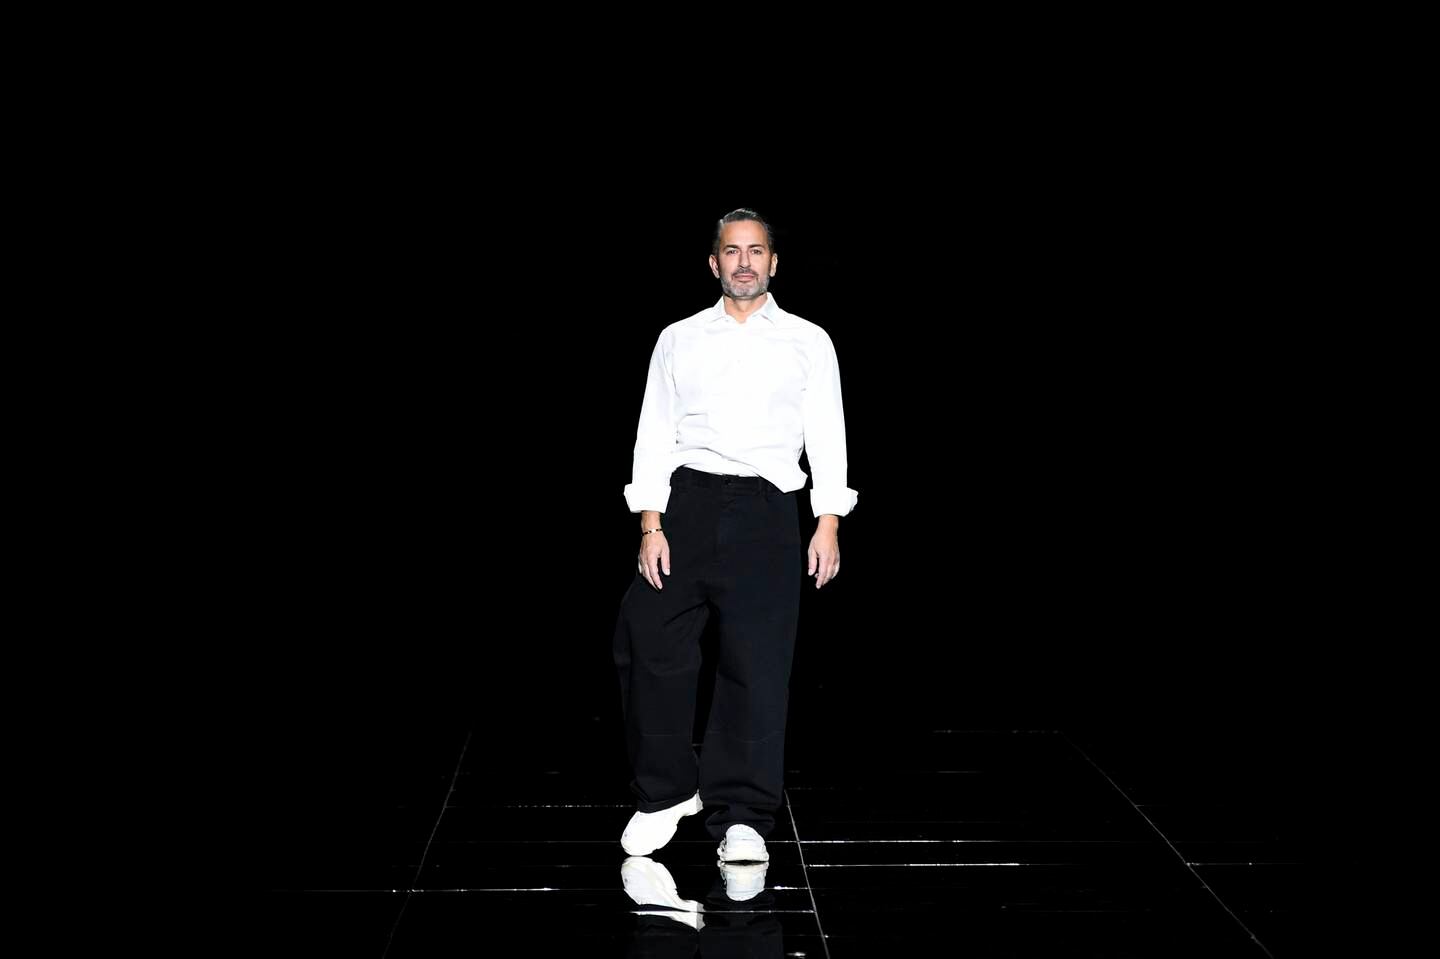 LVMH-owned Marc Jacobs has undergone a drastic turnaround, on track to generate $1 billion a year in sales of apparel and accessories within three to five years.